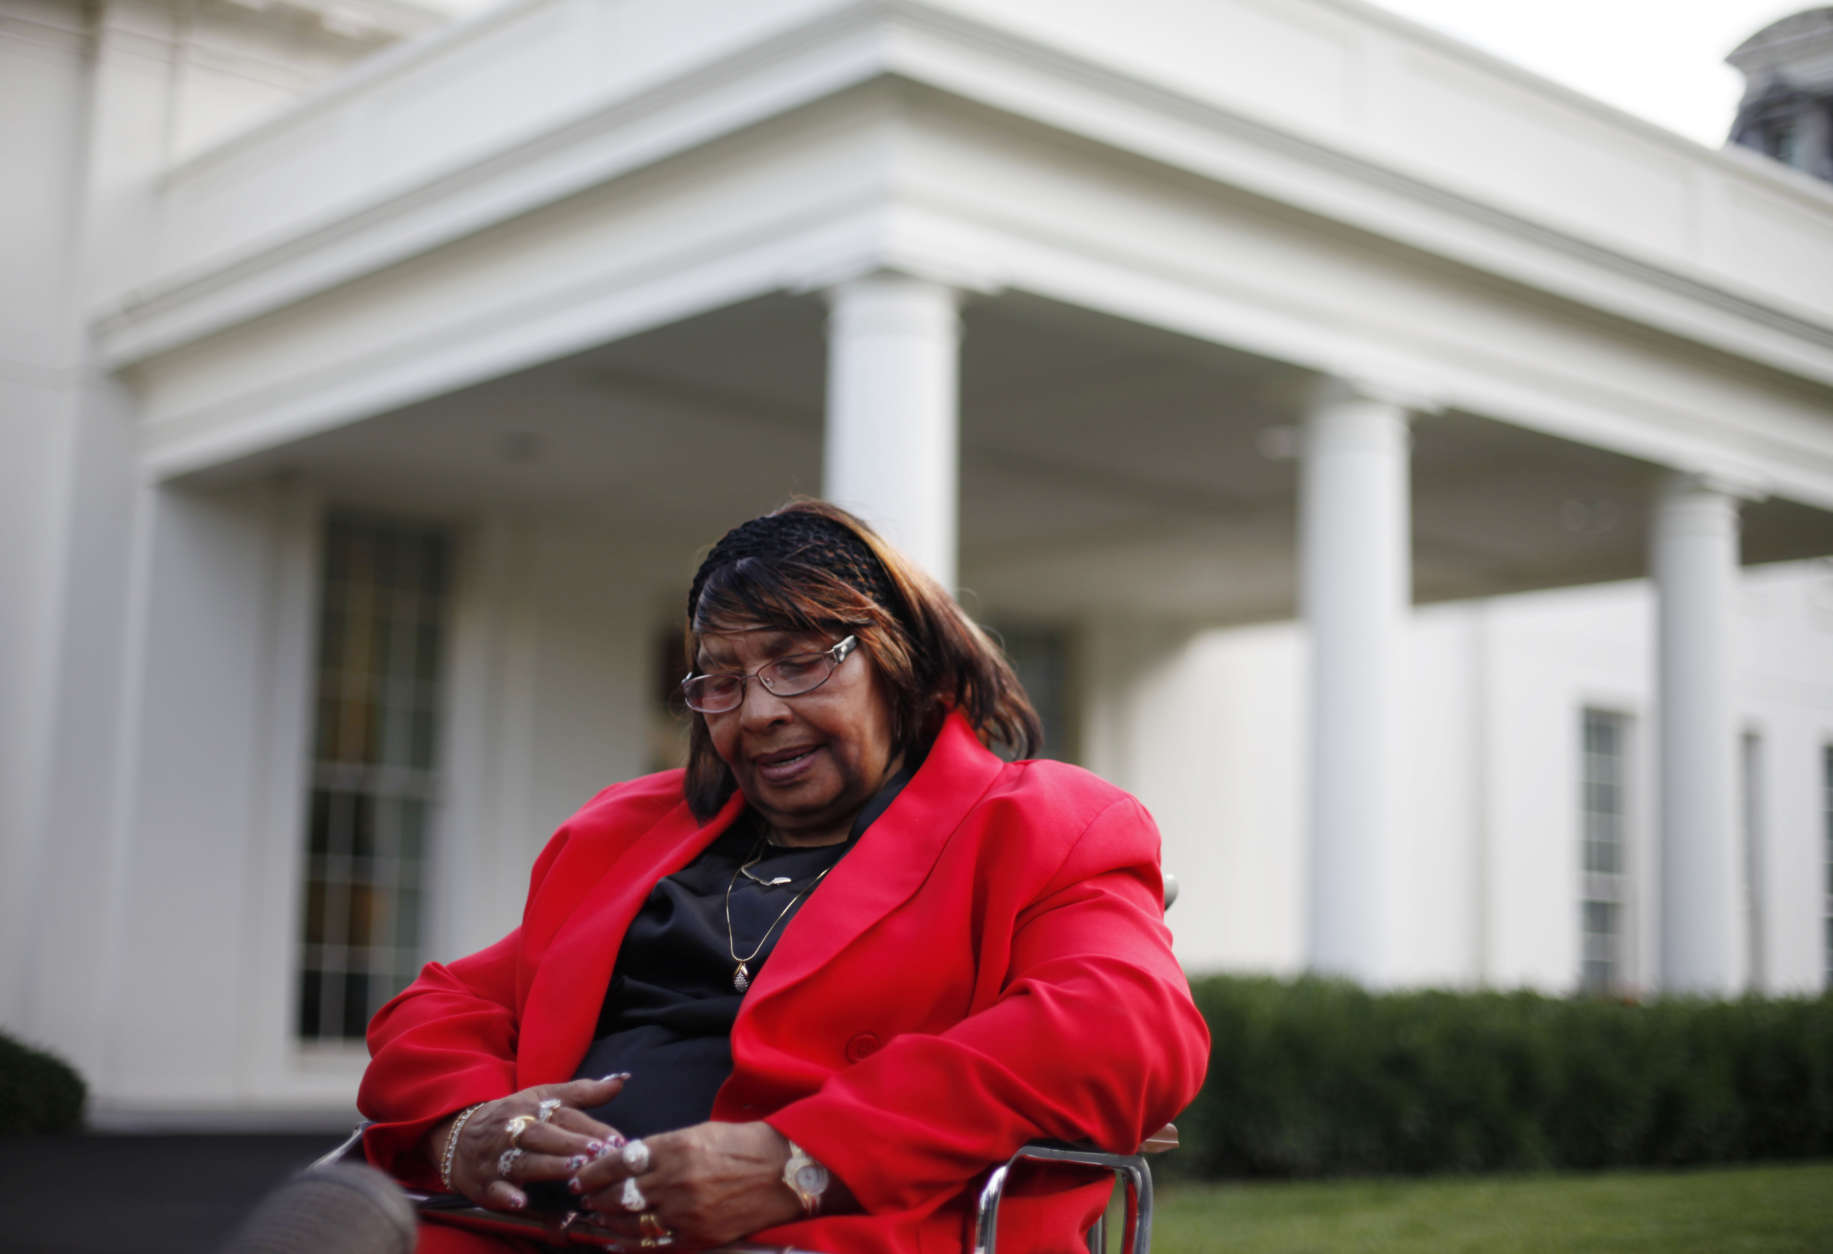 Former baseball player in the Negro League, Mamie 'Peanut' Johnson sits outside the West Wing of the White House in Washington following her meeting with President Barack Obama, Monday, Aug. 5, 2013. White House says Obama invited about a dozen players to the White House to mark their contributions to American history, civil rights and athletics. The players competed for teams like the Philadelphia Stars, New York Black Yankees, Indianapolis Clowns and Boston Blues. (AP Photo/Pablo Martinez Monsivais)